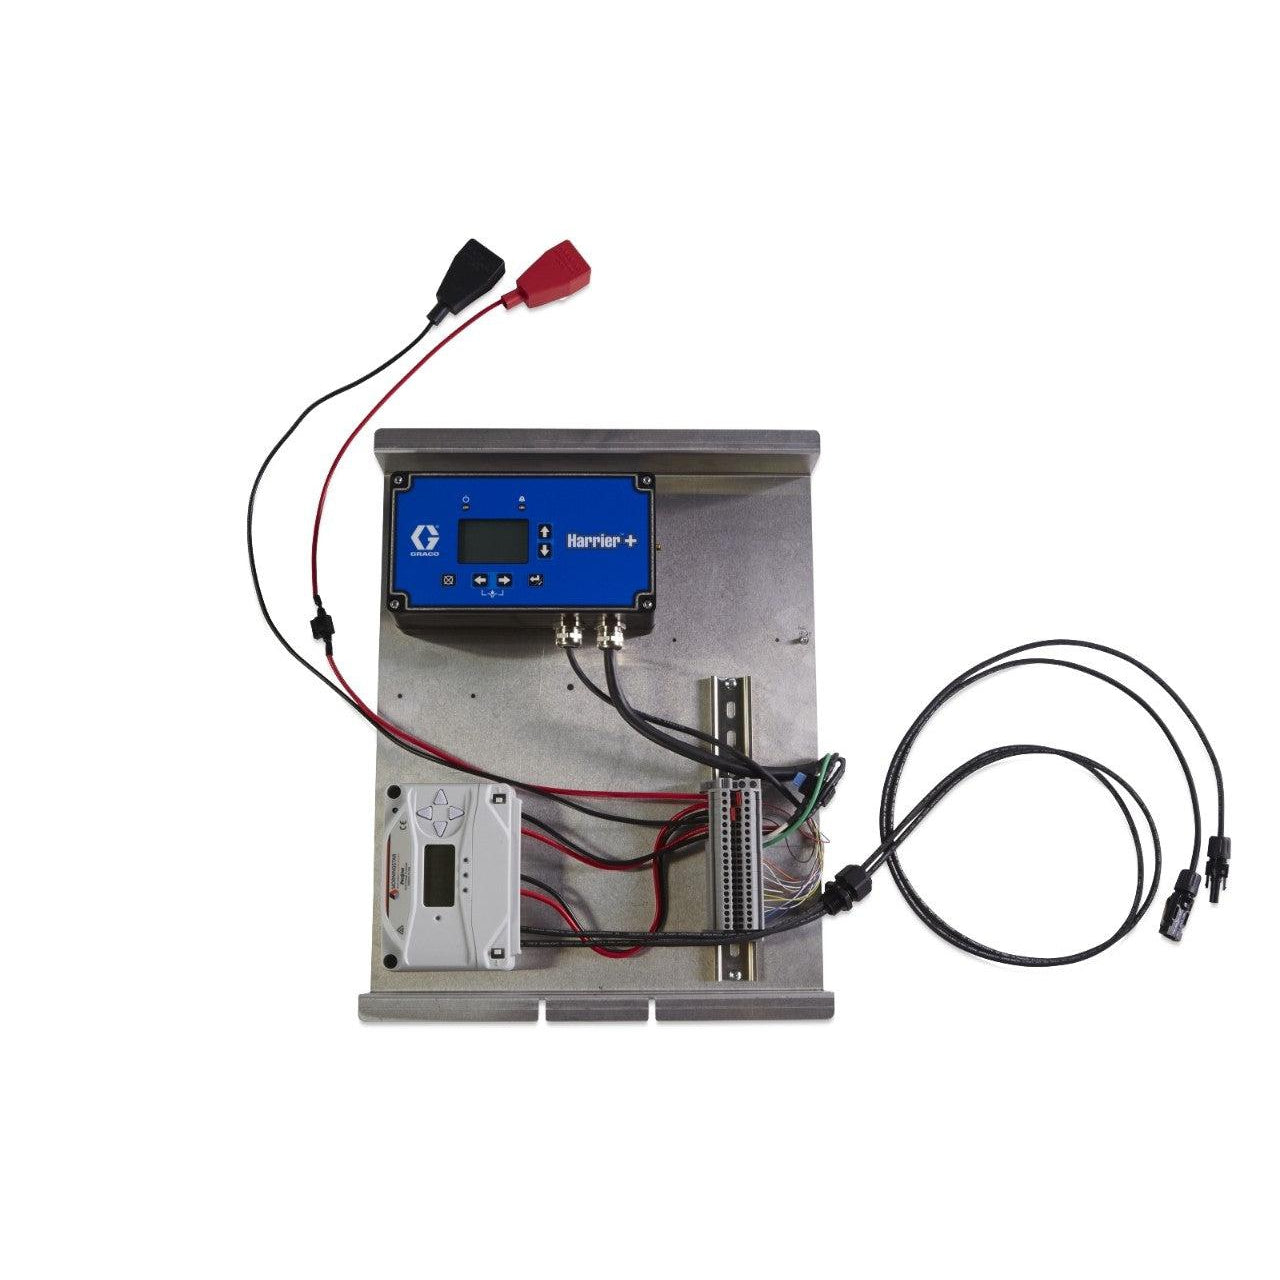 Four-Battery Control Box without Controller and Includes ASC 24/16 One Panel Charge Controller